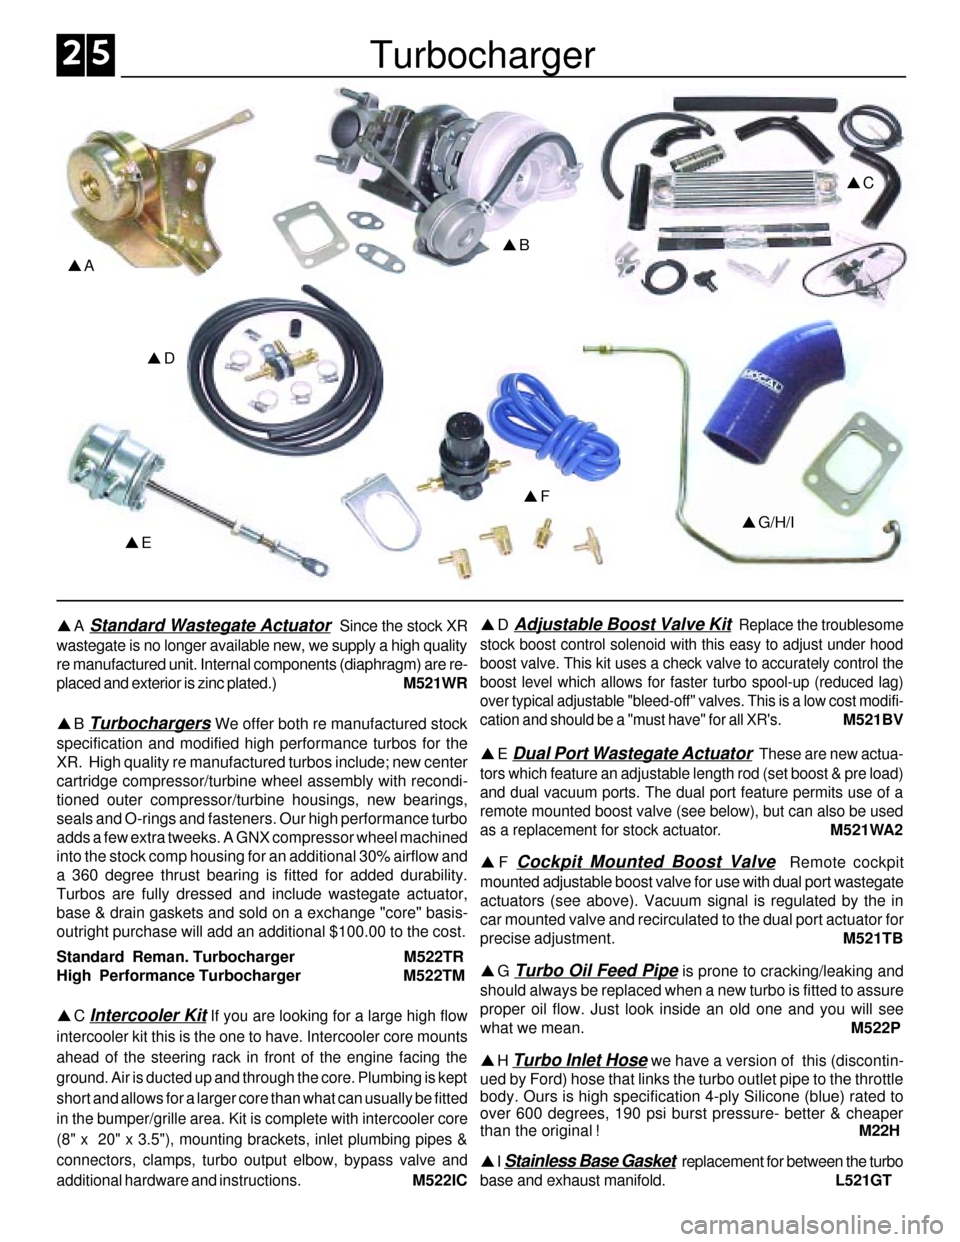 FORD SIERRA 1985 1.G XR4 Workshop Manual Turbocharger
pC
pG/H/I
pF
pD
pA
pB
pE
pA Standard Wastegate Actuator  Since the stock XR
wastegate is no longer available new, we supply a high quality
re manufactured unit. Internal components (diaph